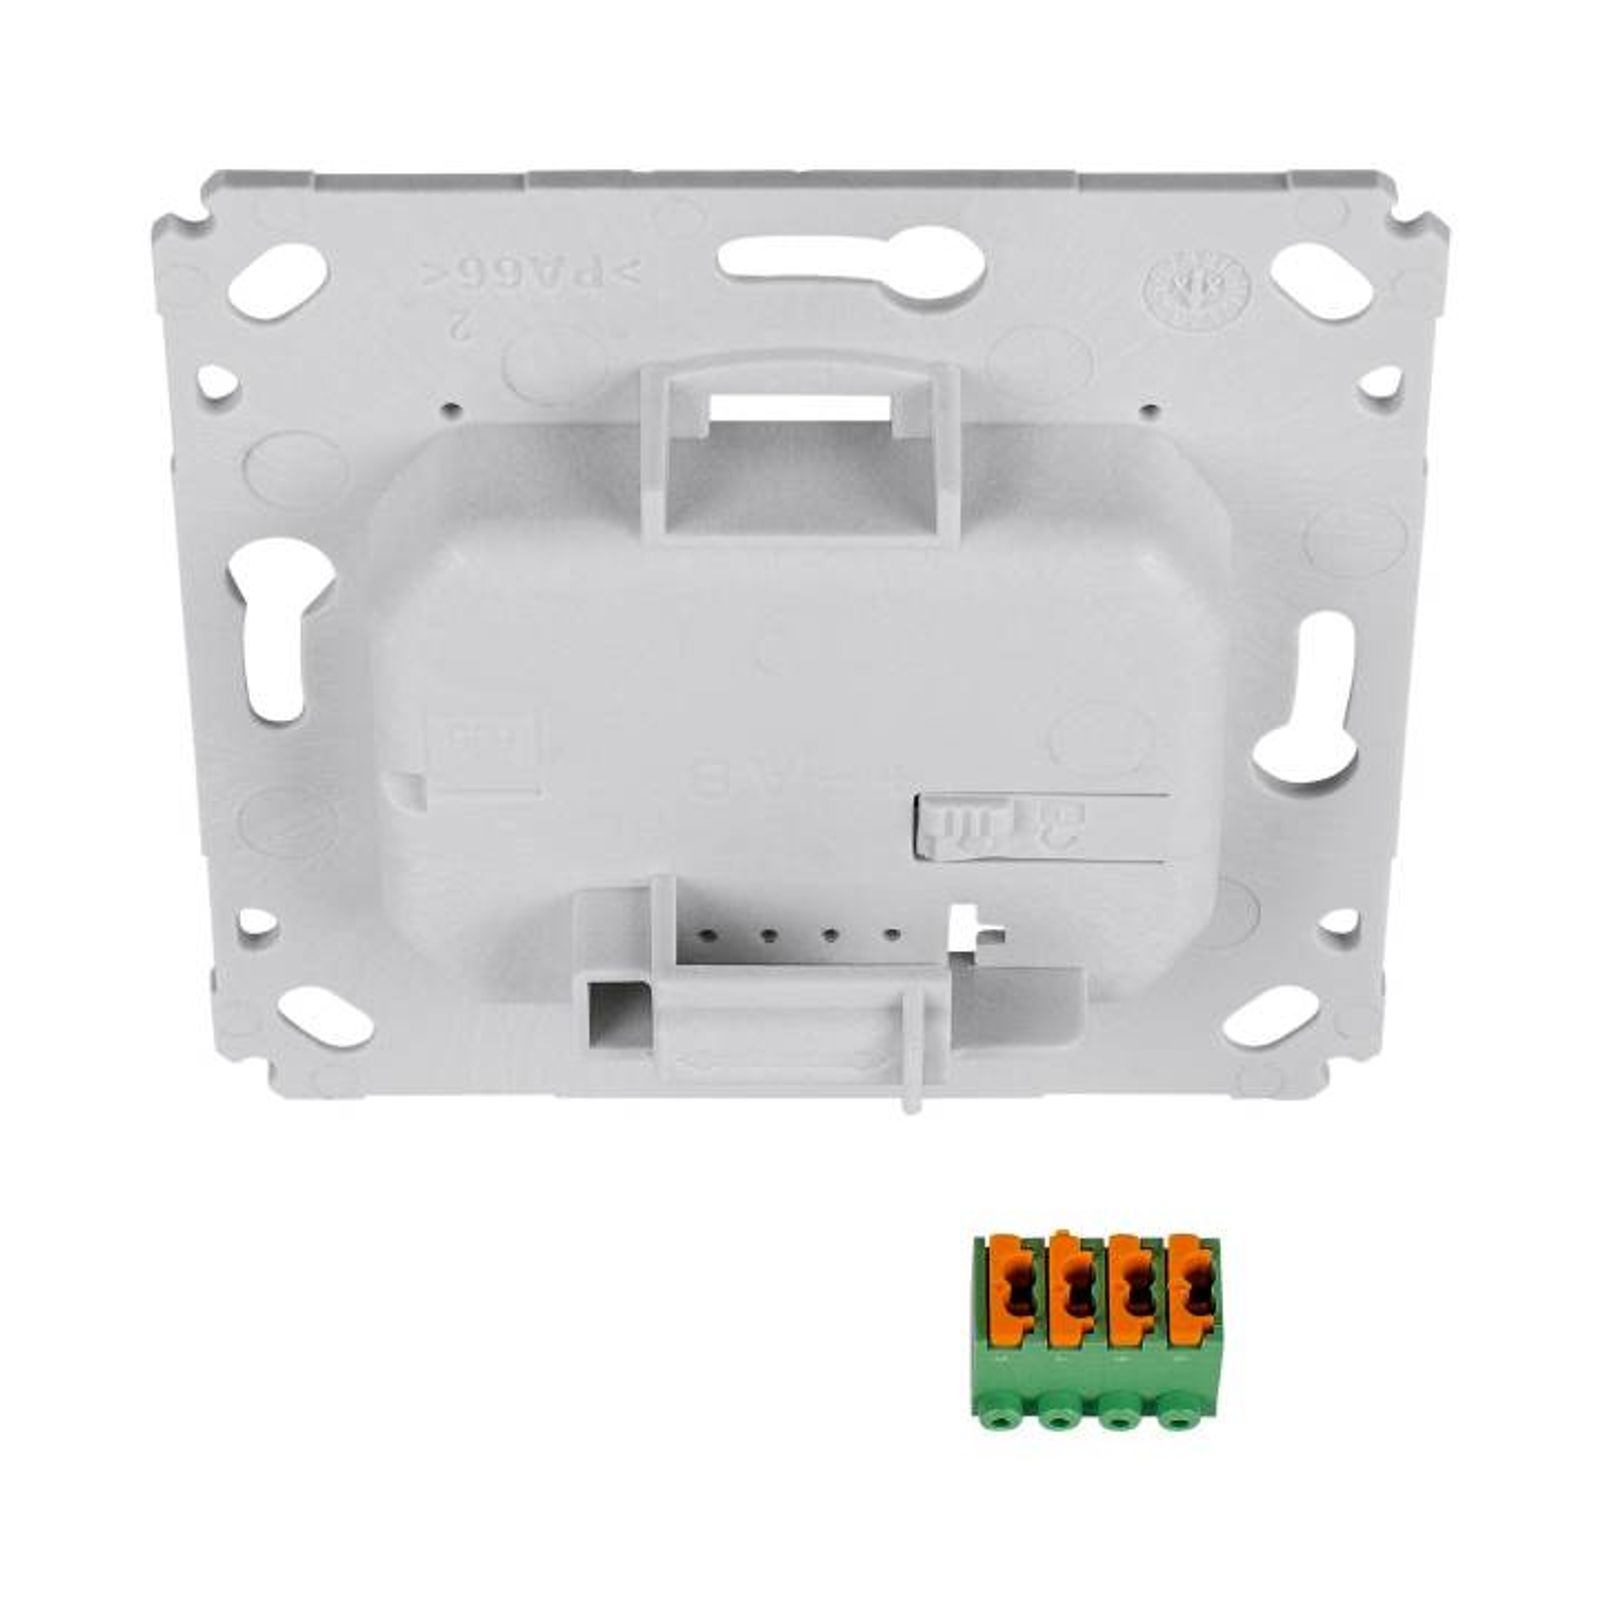 Homematic IP Wired Smart Home Wandtaster HmIPW-WRC2 - 2-fach